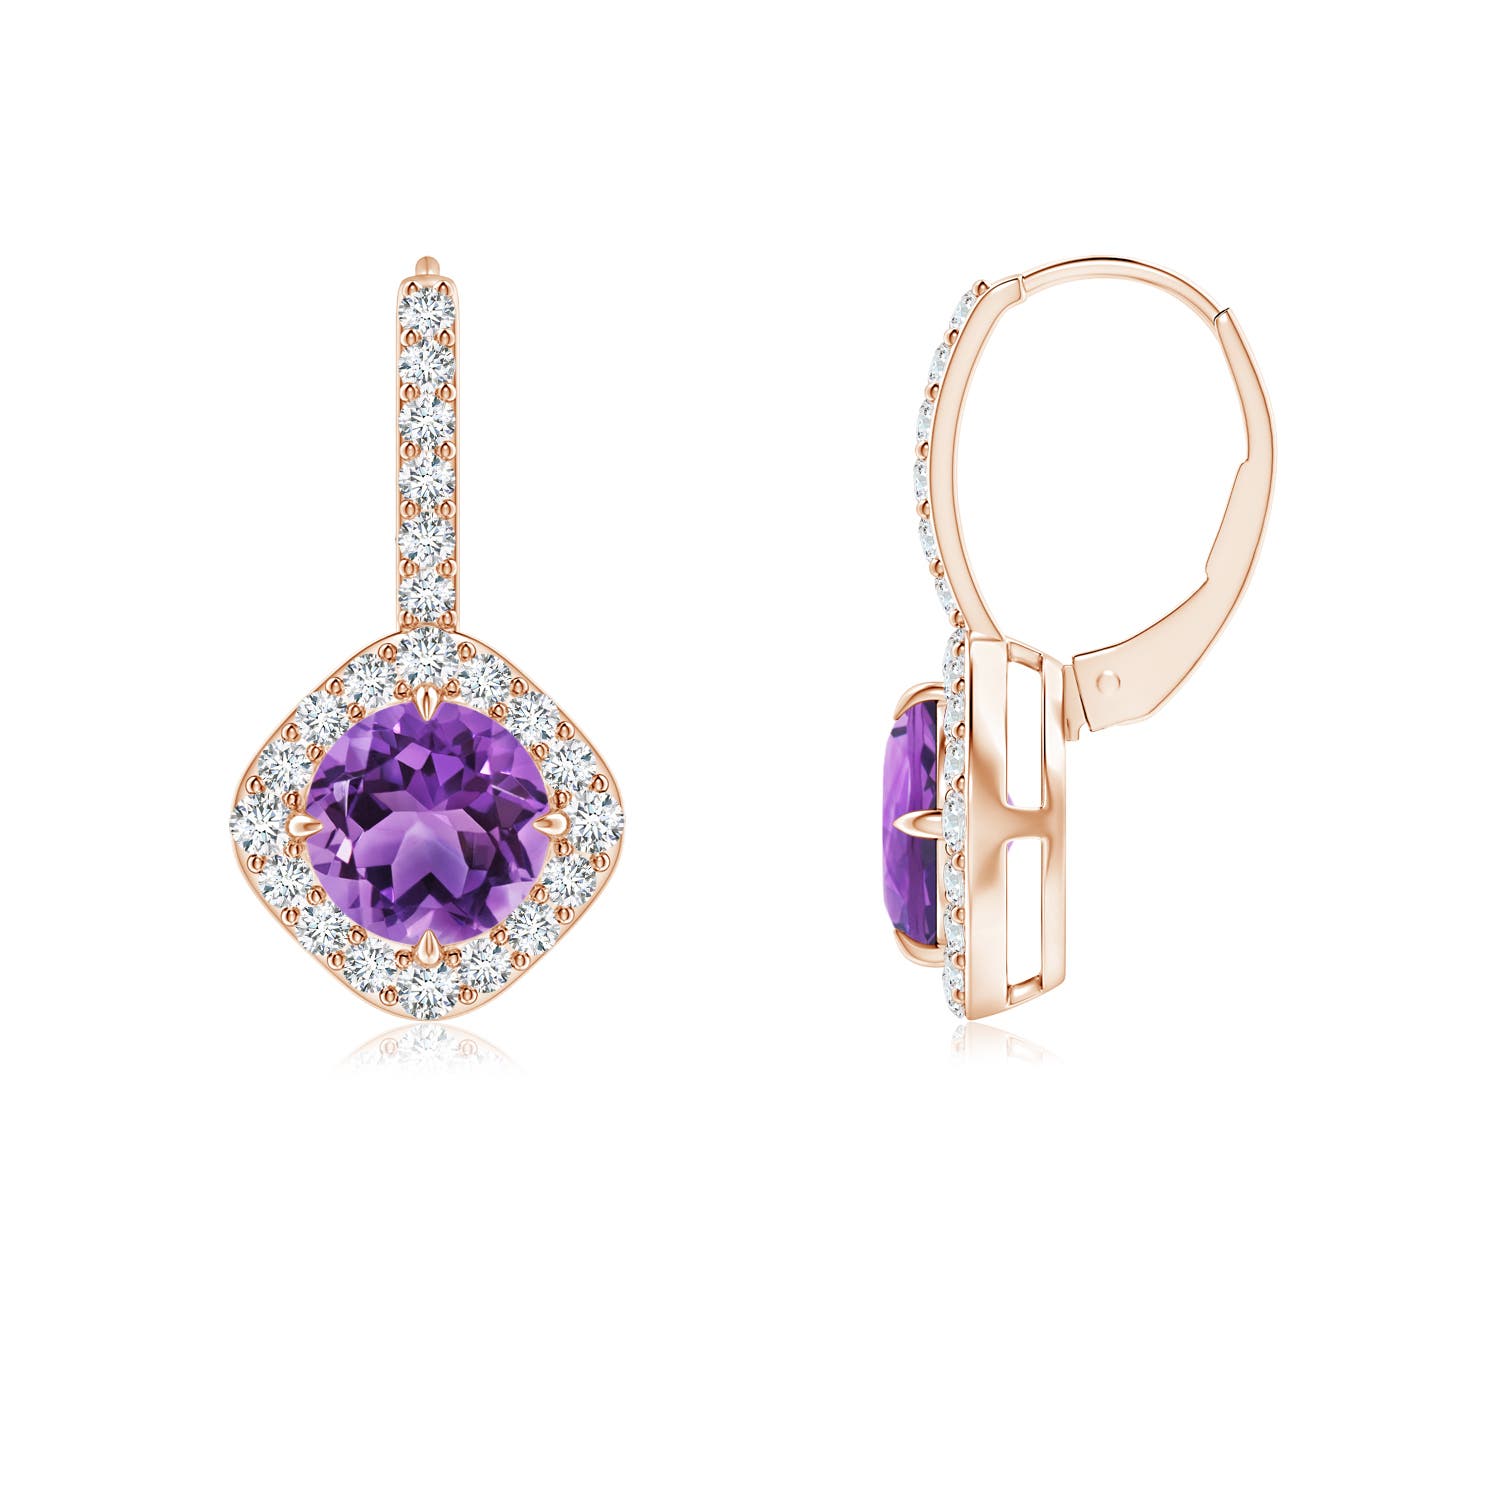 AA - Amethyst / 1.98 CT / 14 KT Rose Gold